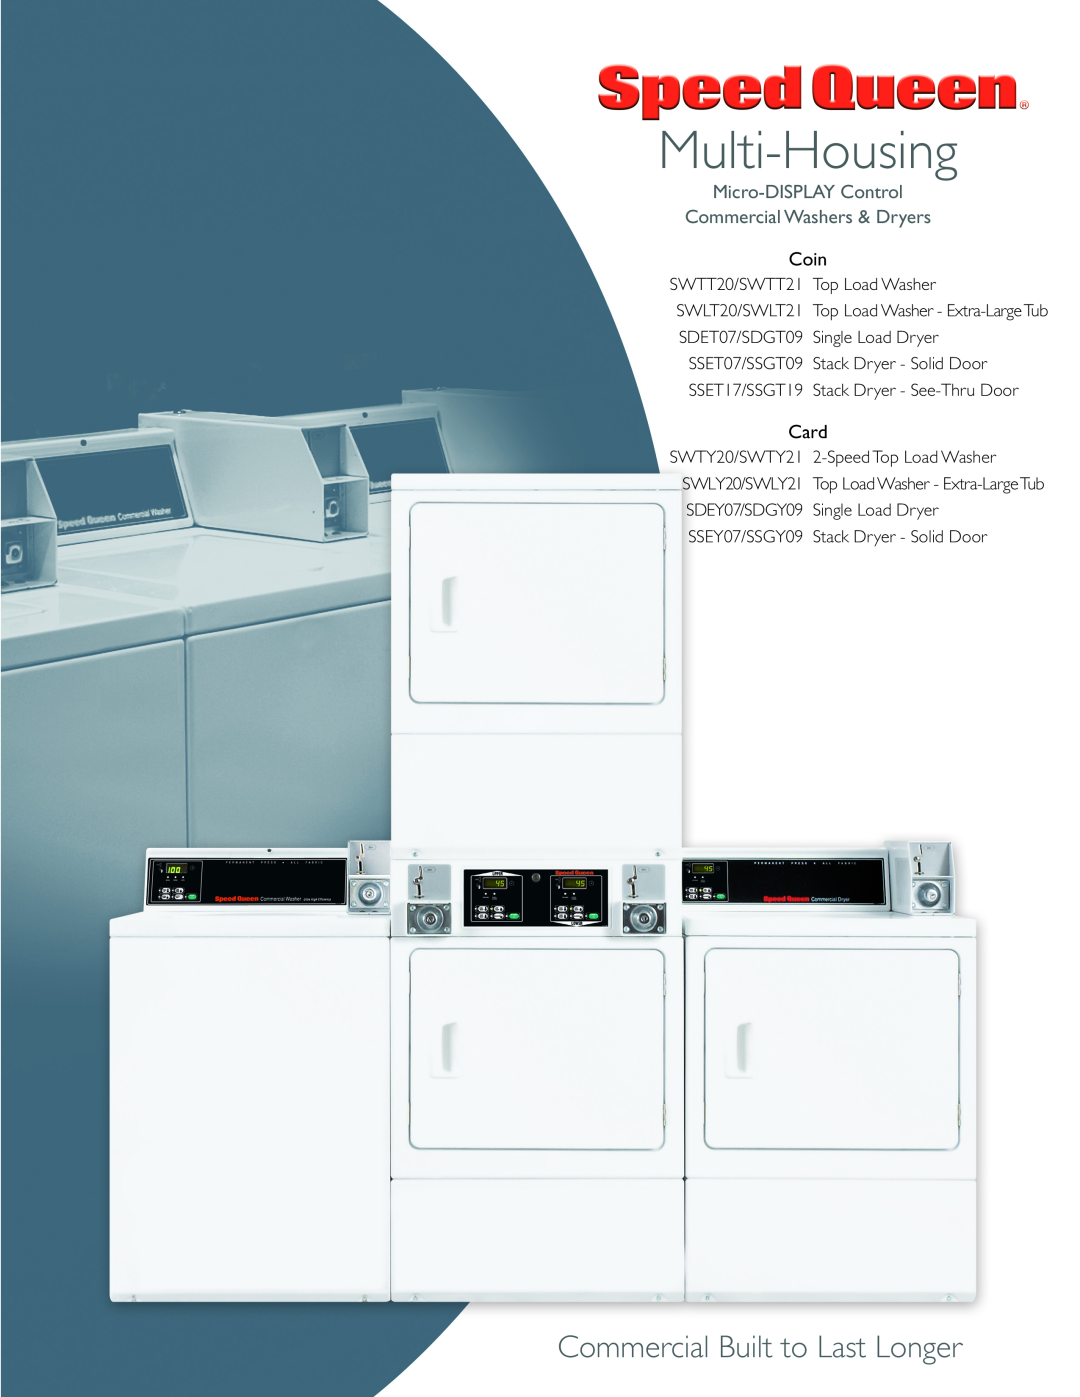 Speed Queen SWTY20/SWTY21, SWTT20 manual Micro-DISPLAYControl Commercial Washers & Dryers, Multi-Housing, Coin, Card 